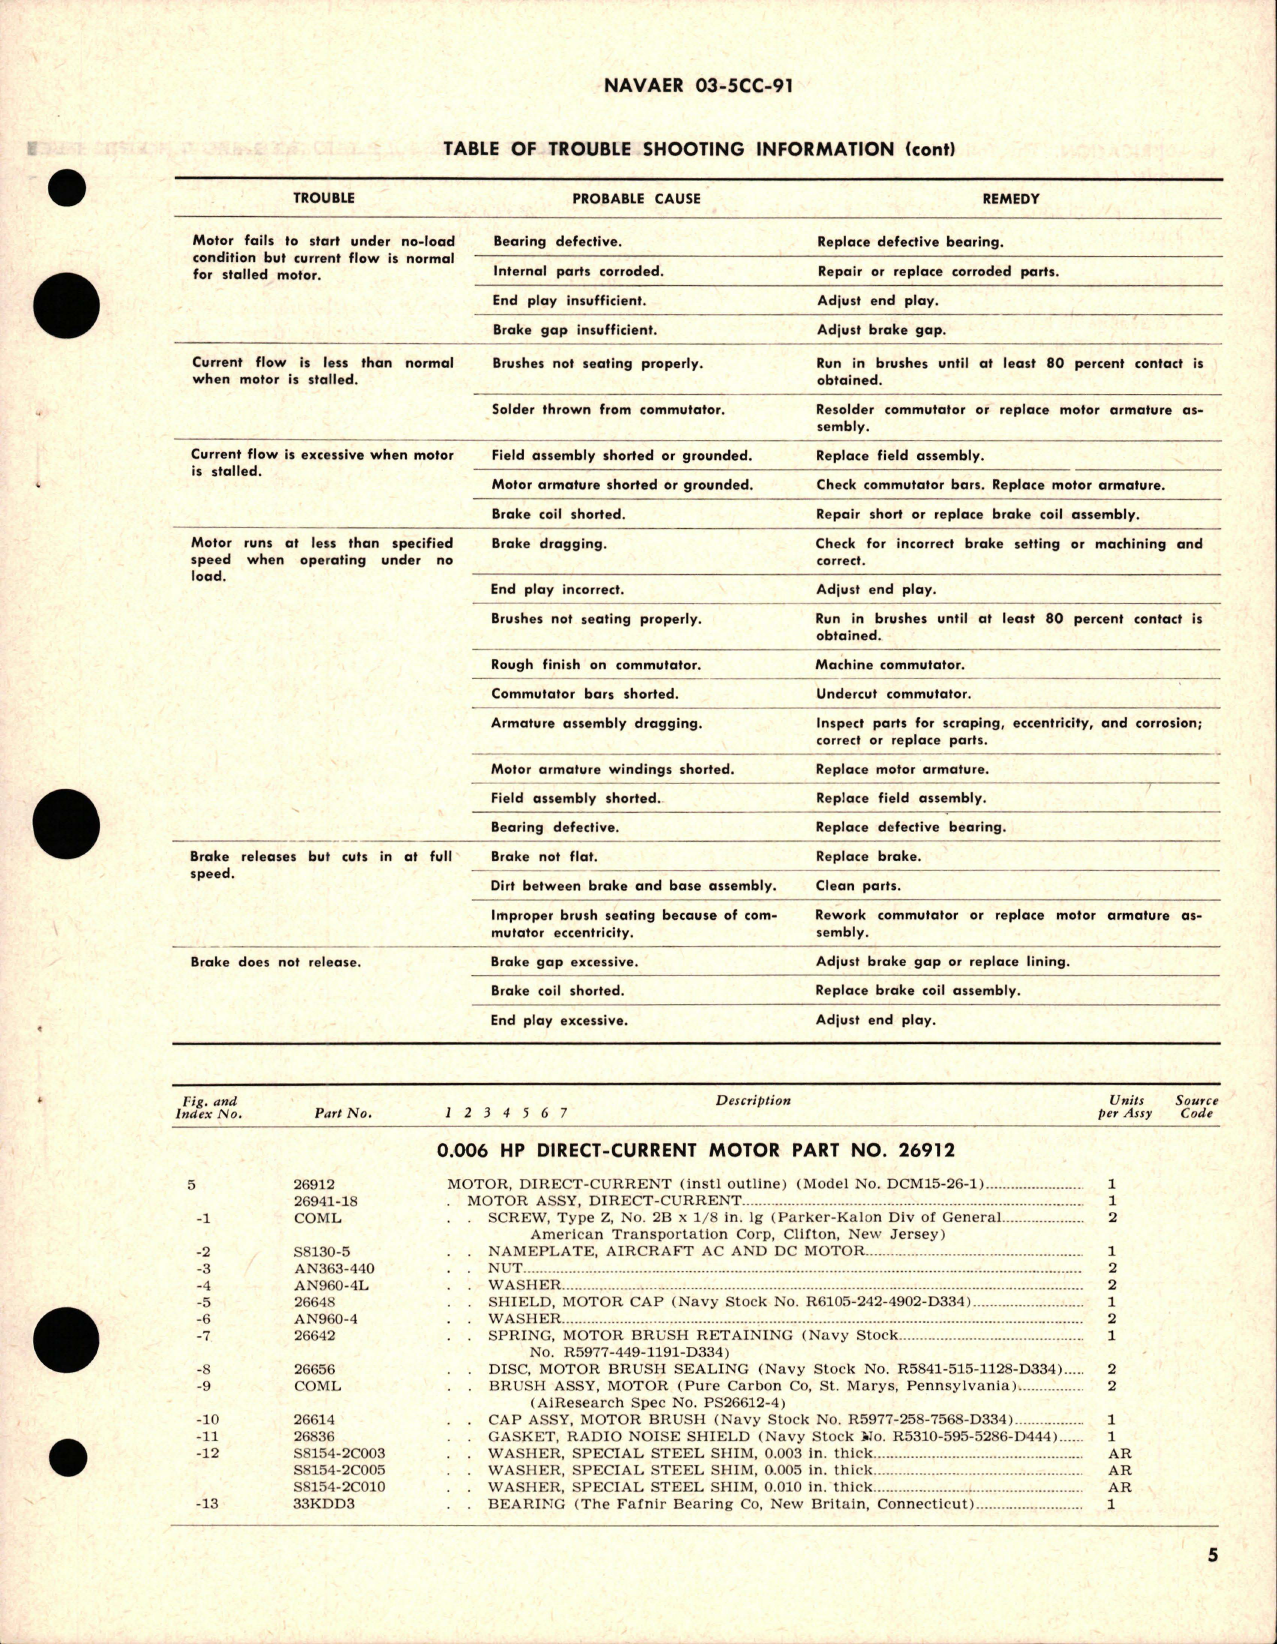 Sample page 5 from AirCorps Library document: Overhaul Instructions with Parts Breakdown for Direct-Current Motor - 0.006 HP - Part 26912 - Model DCM15-26-1